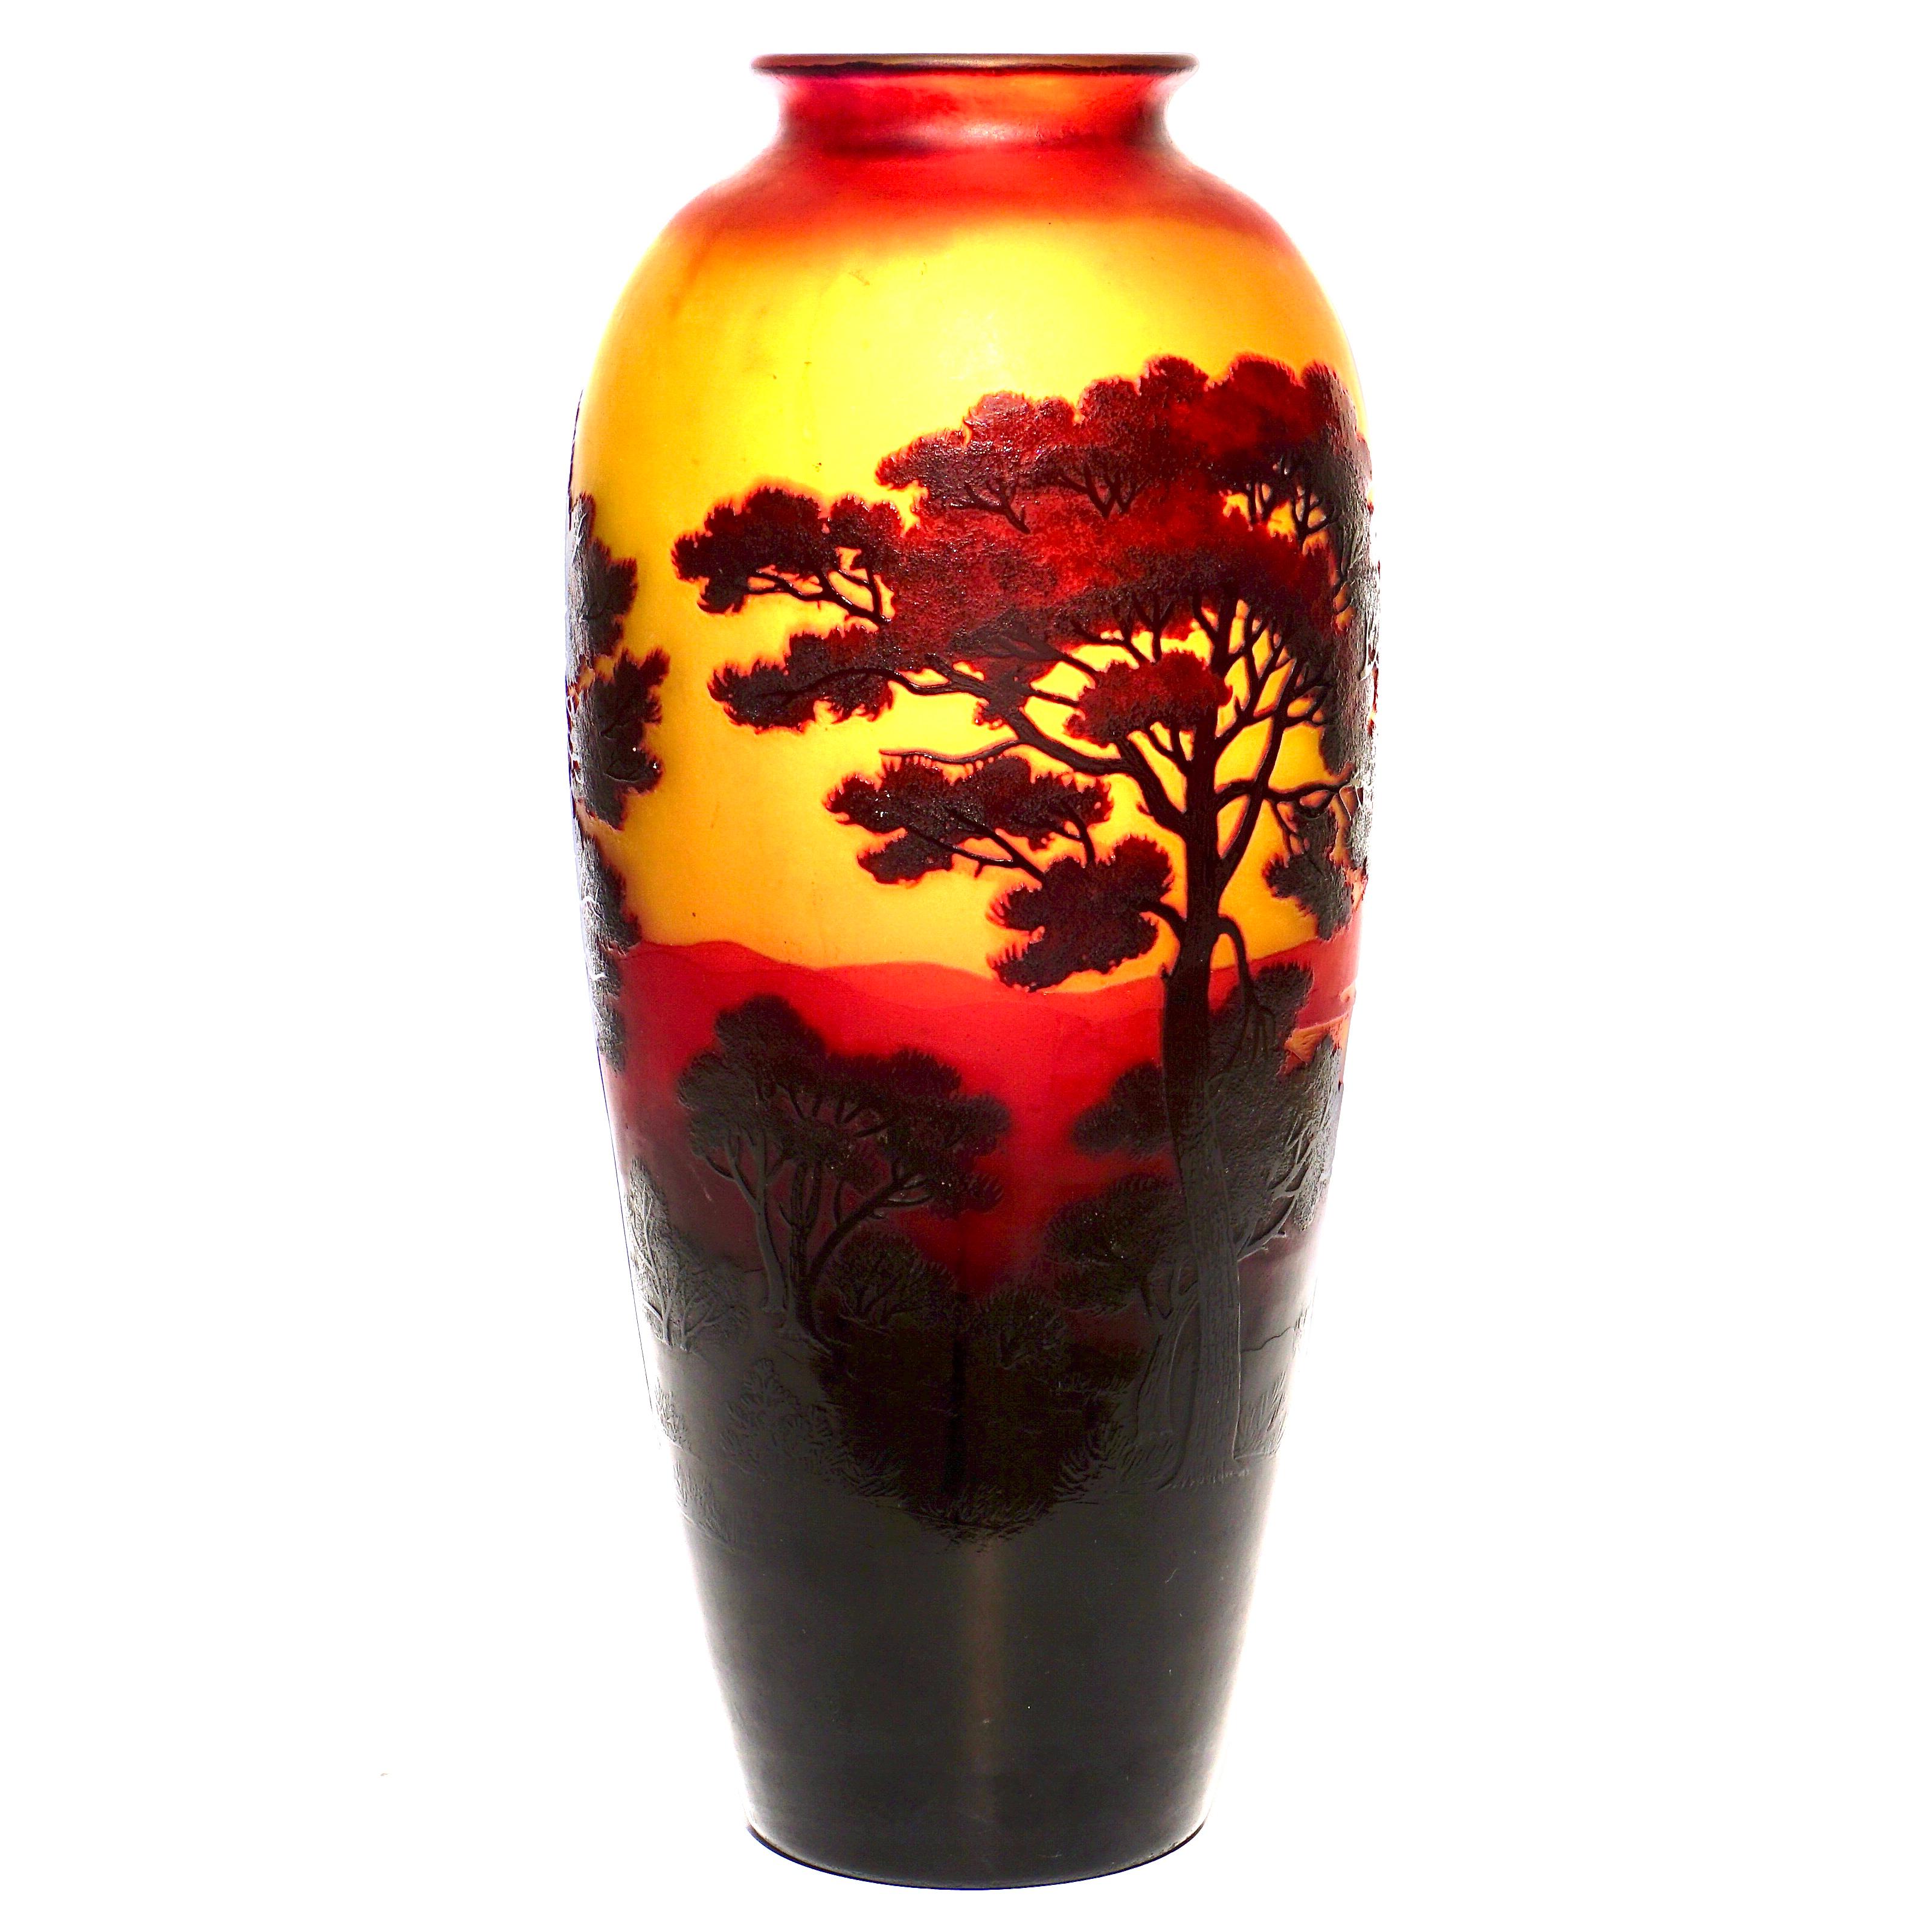 D'argental Paul Nicolas Art Nouveau Cameo Scenic Art Glass vase, 1920 

A monumental wheel carved and acid etched cameo Art Nouveau red and yellow art glass scenic vase representing trees in the foreground and a lake in the background with a dawn